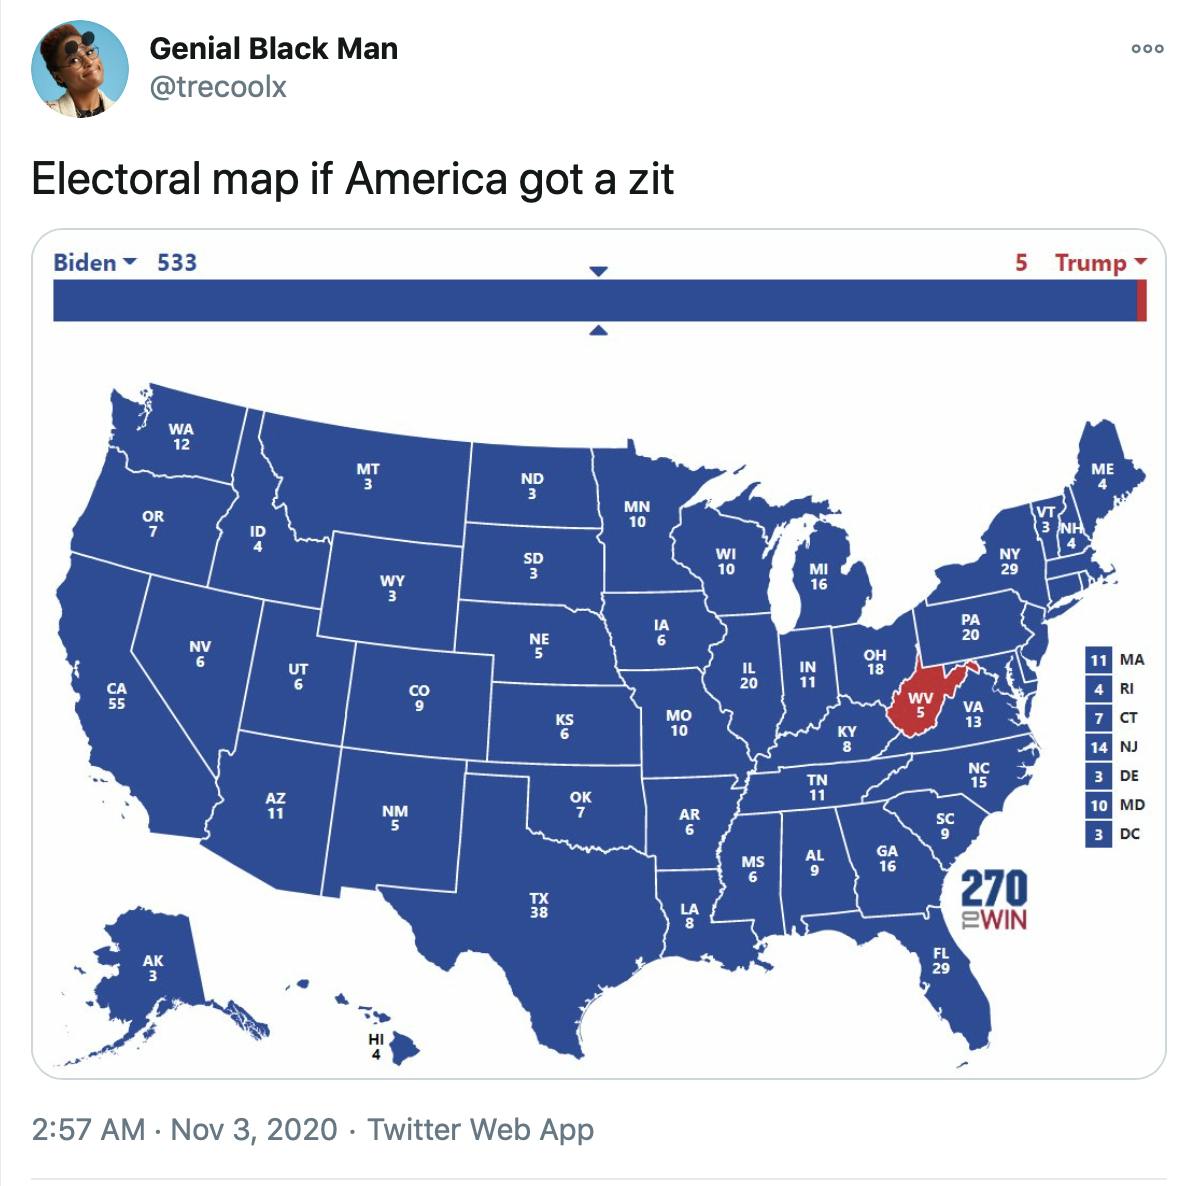 'Electoral map if America got a zit' image of the electoral college all in blue except for West Virginia which is red